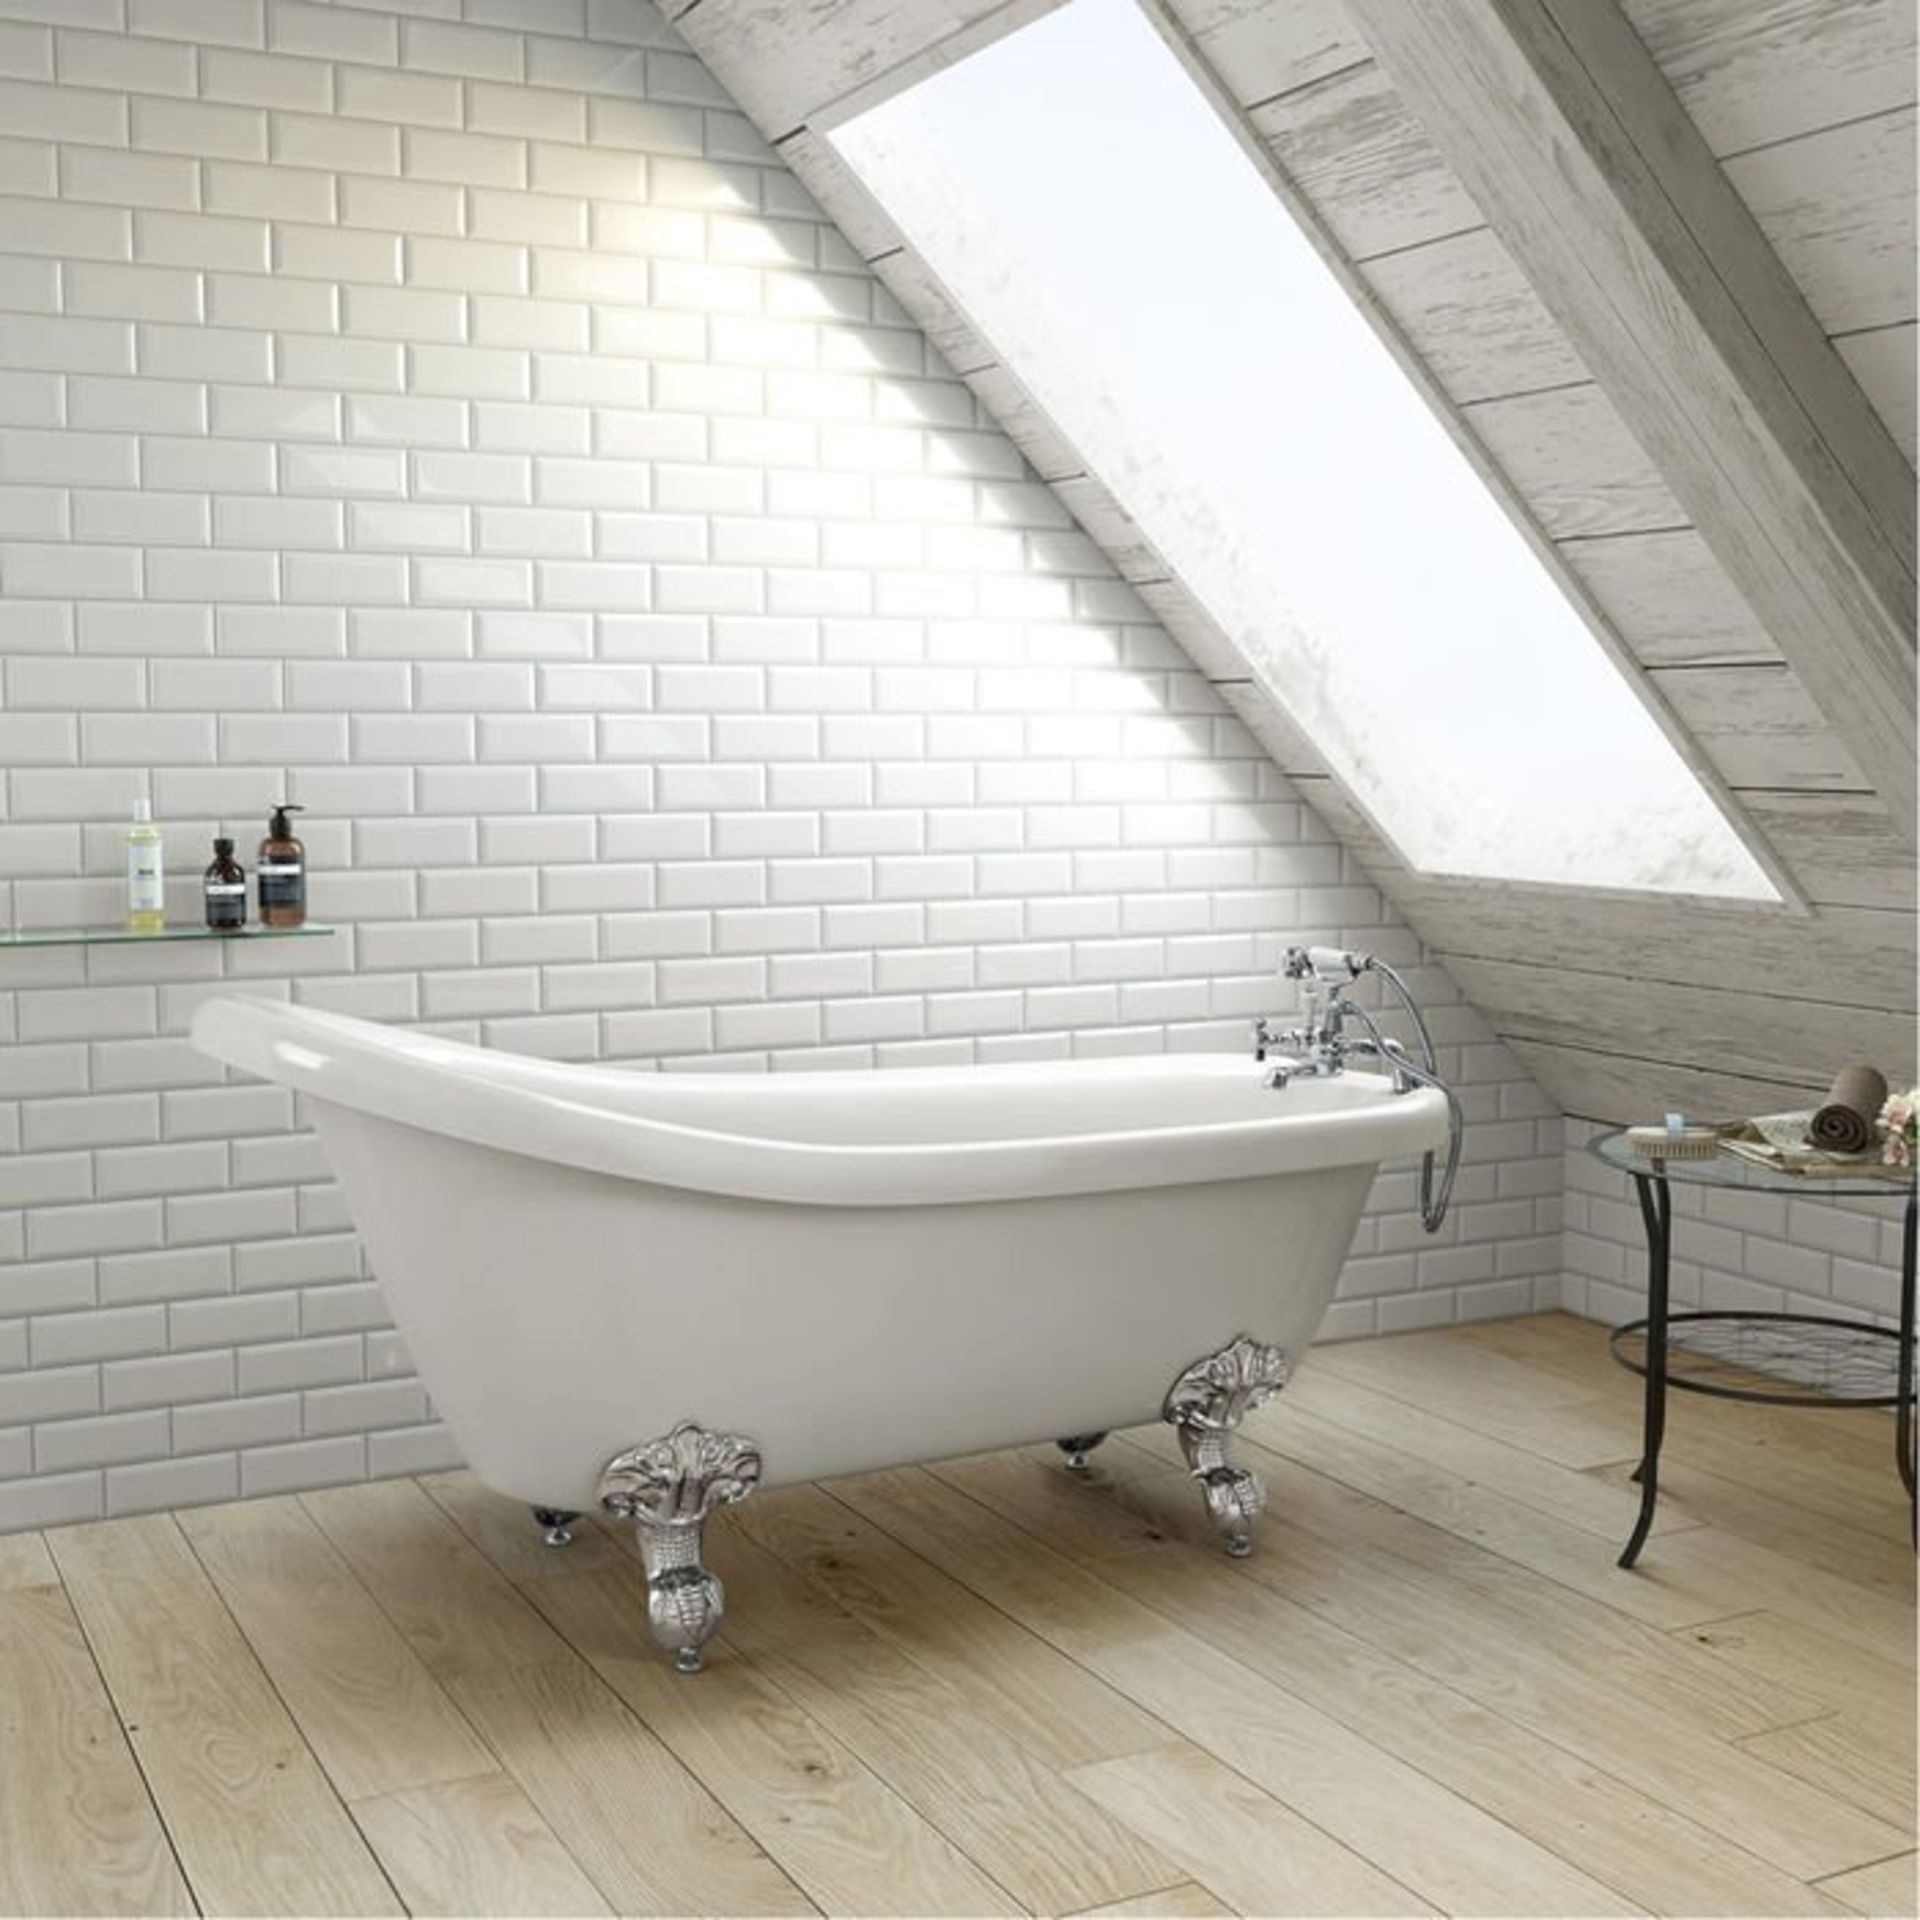 (G199) 1720mm Victoria Traditional Roll Top Slipper Bath - Ball Feet - Large. RRP £799.99. Our - Image 2 of 4